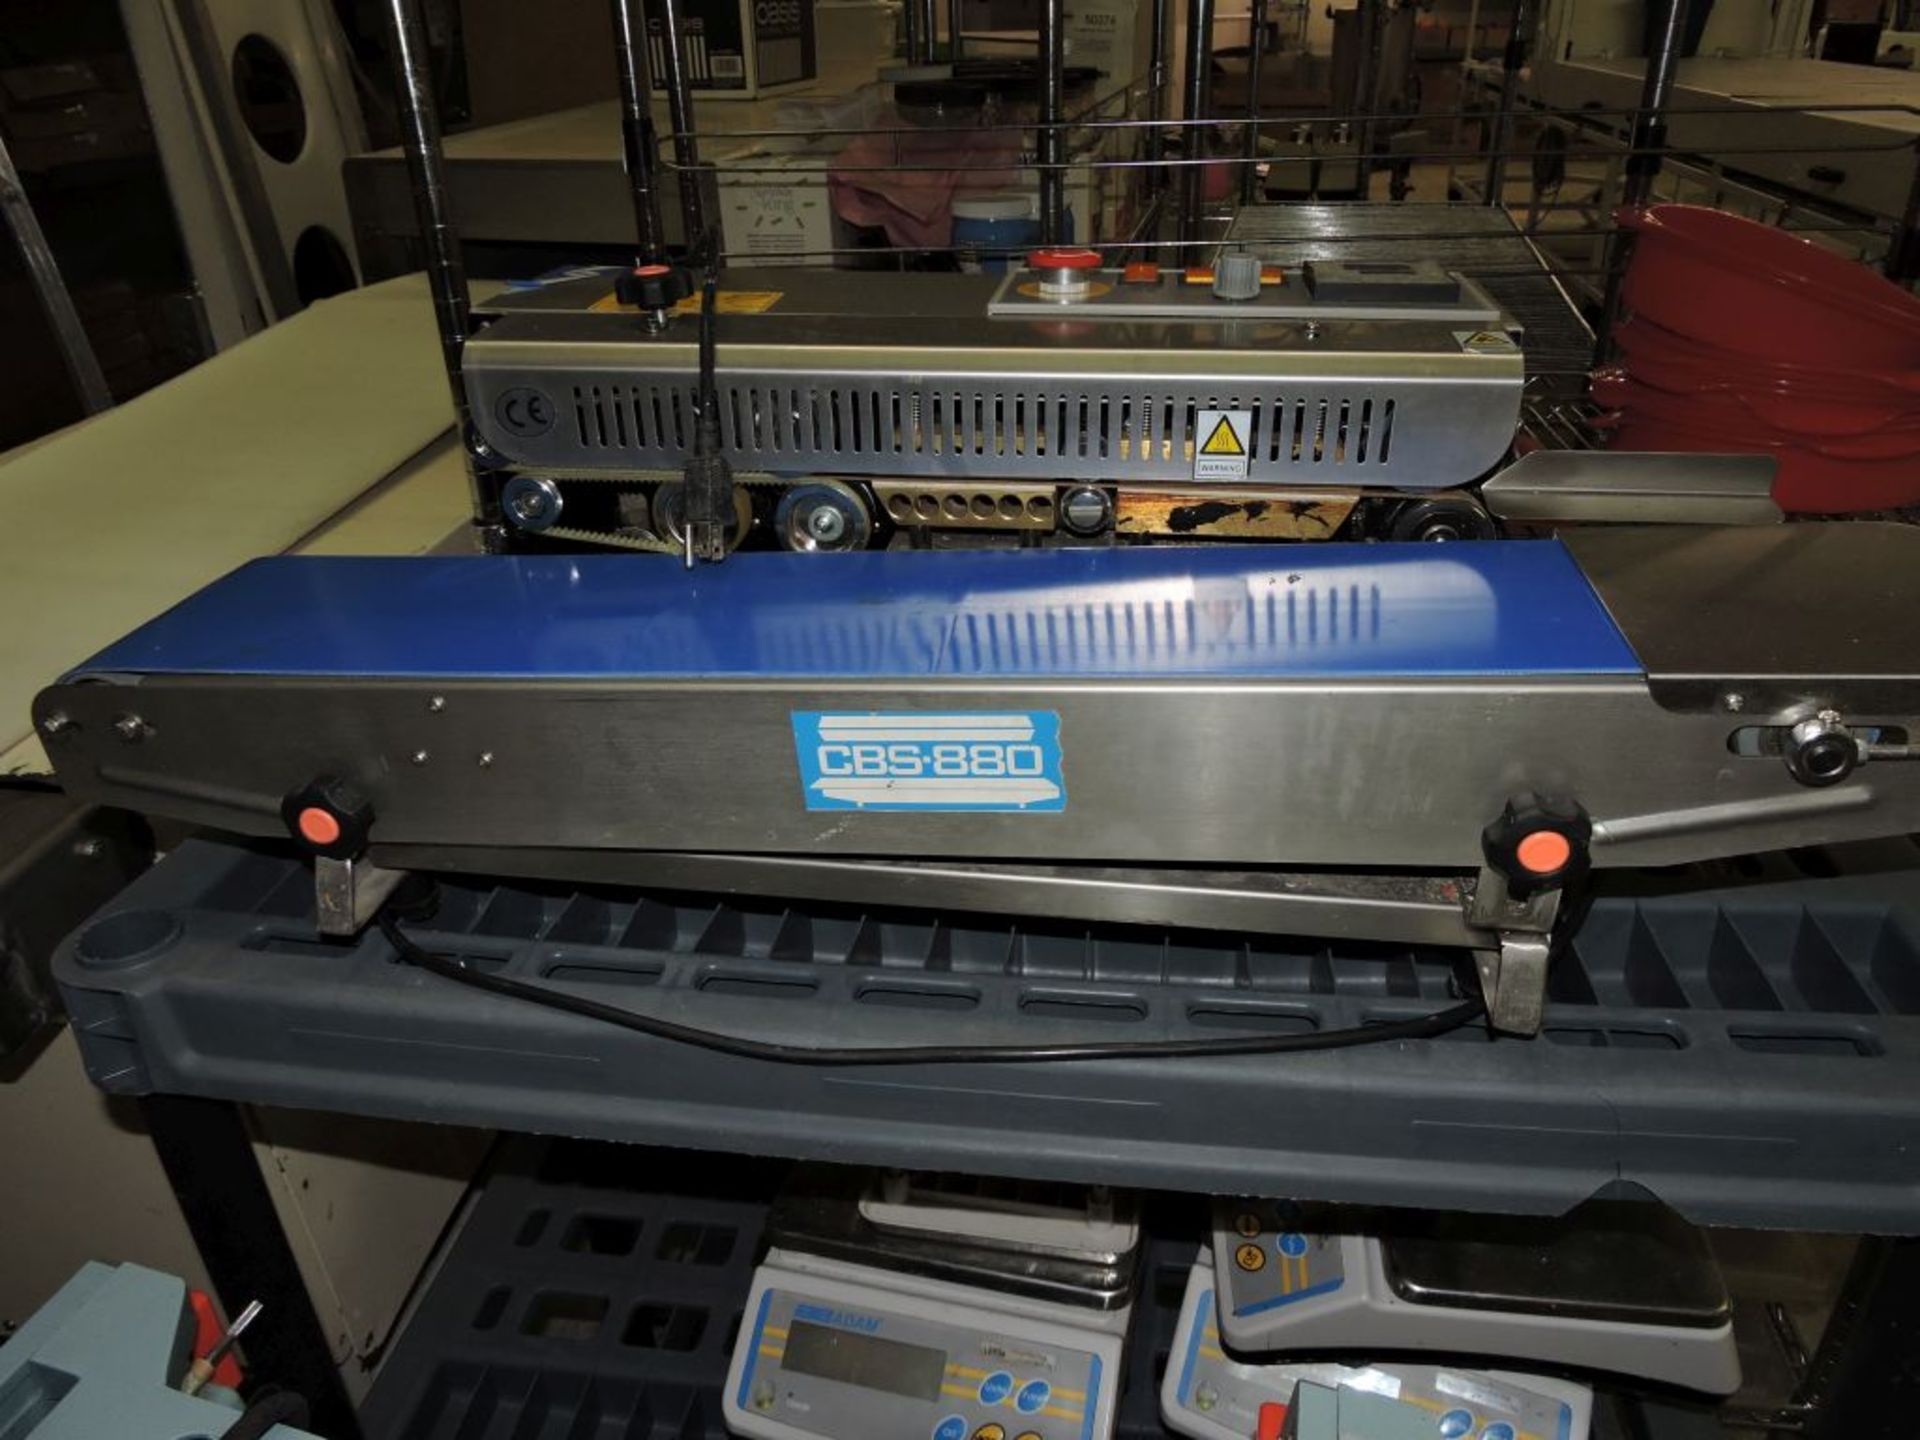 Hualian Machinery table top bag sealer, model CBS-880, sn 15351, approx. 18". - Image 4 of 6